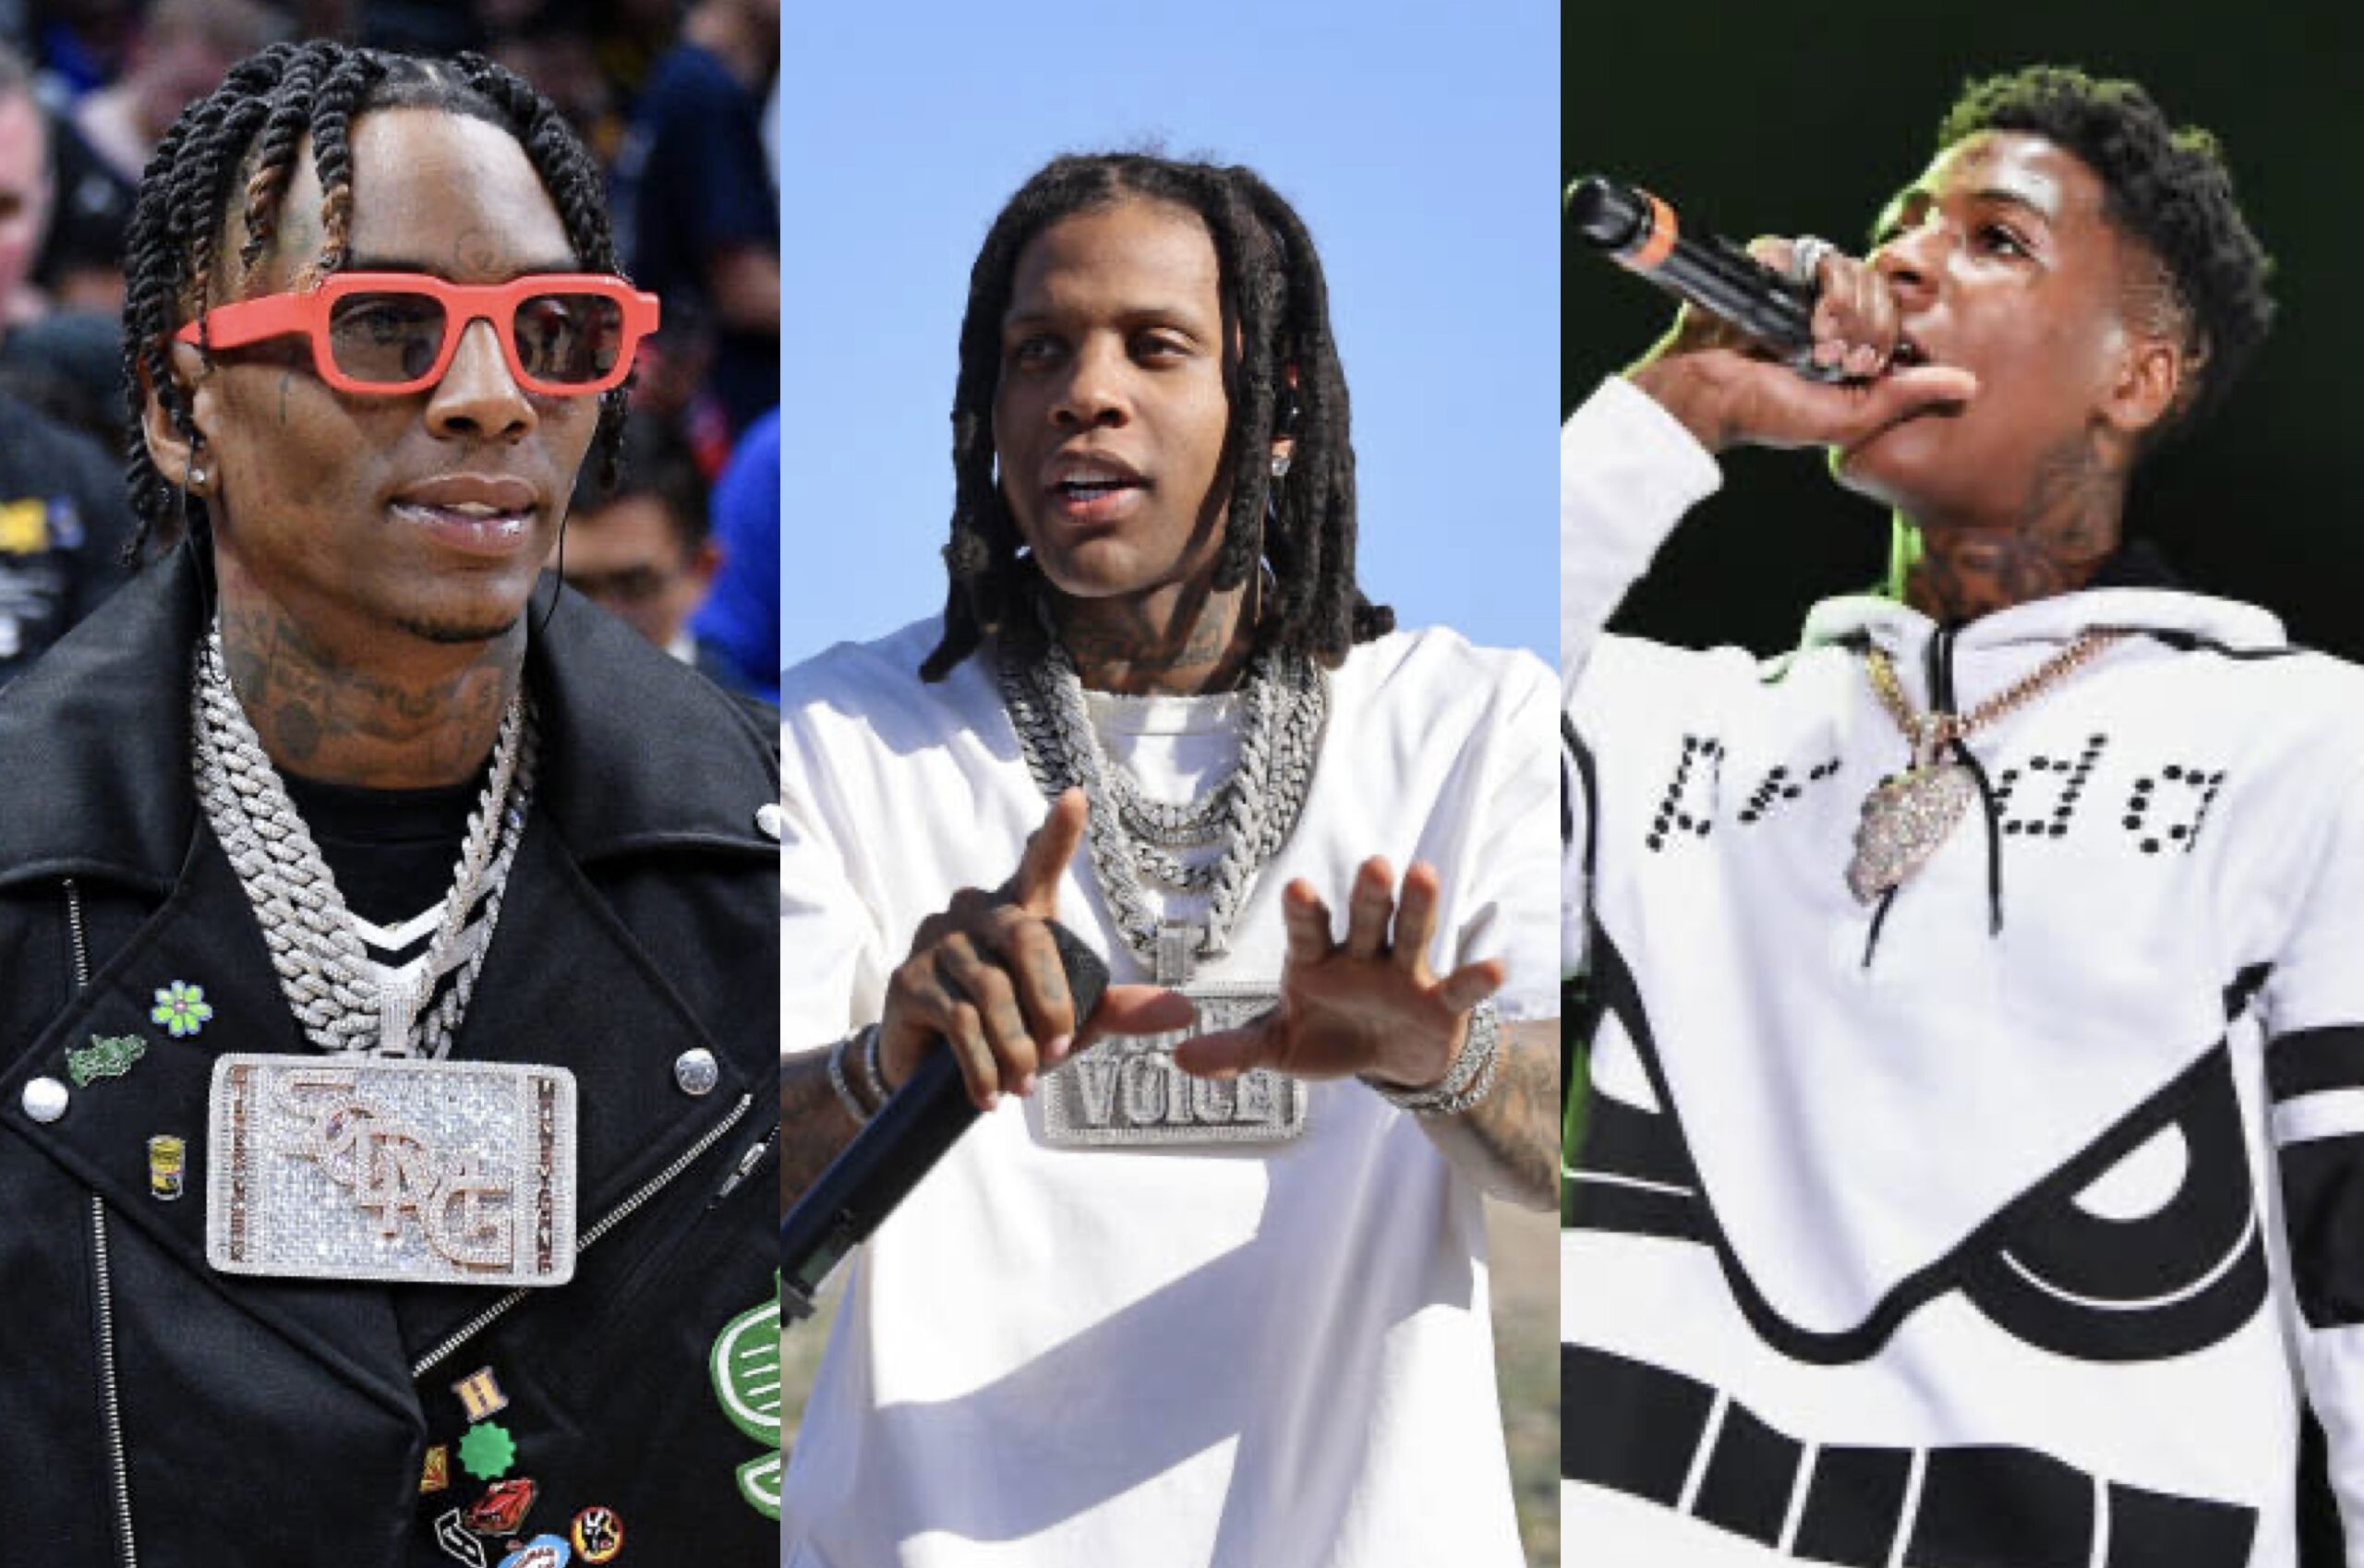 Soulja Boy Trends After Calling Out Lil Durk & NBA Youngboy For Dropping Albums On The Same Day As Him: 'Nobody Wants To Hear That Sneak Dissing Music'